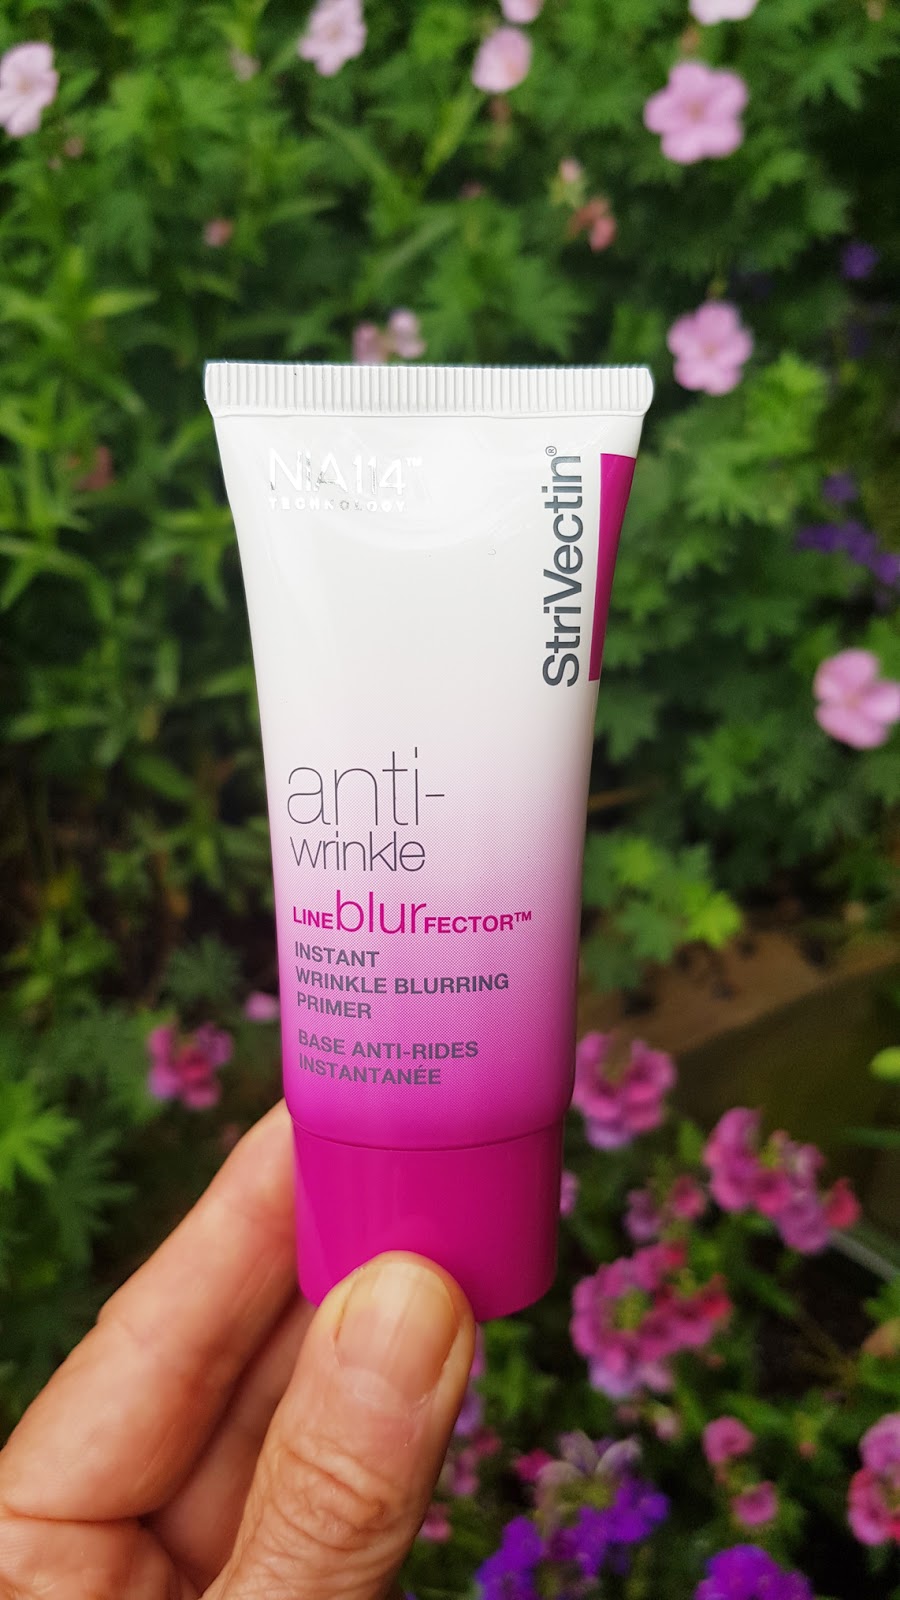 The pink and white 30ml tube of Strivectin's new Line BlurFector instant wrinkle blurring primer 